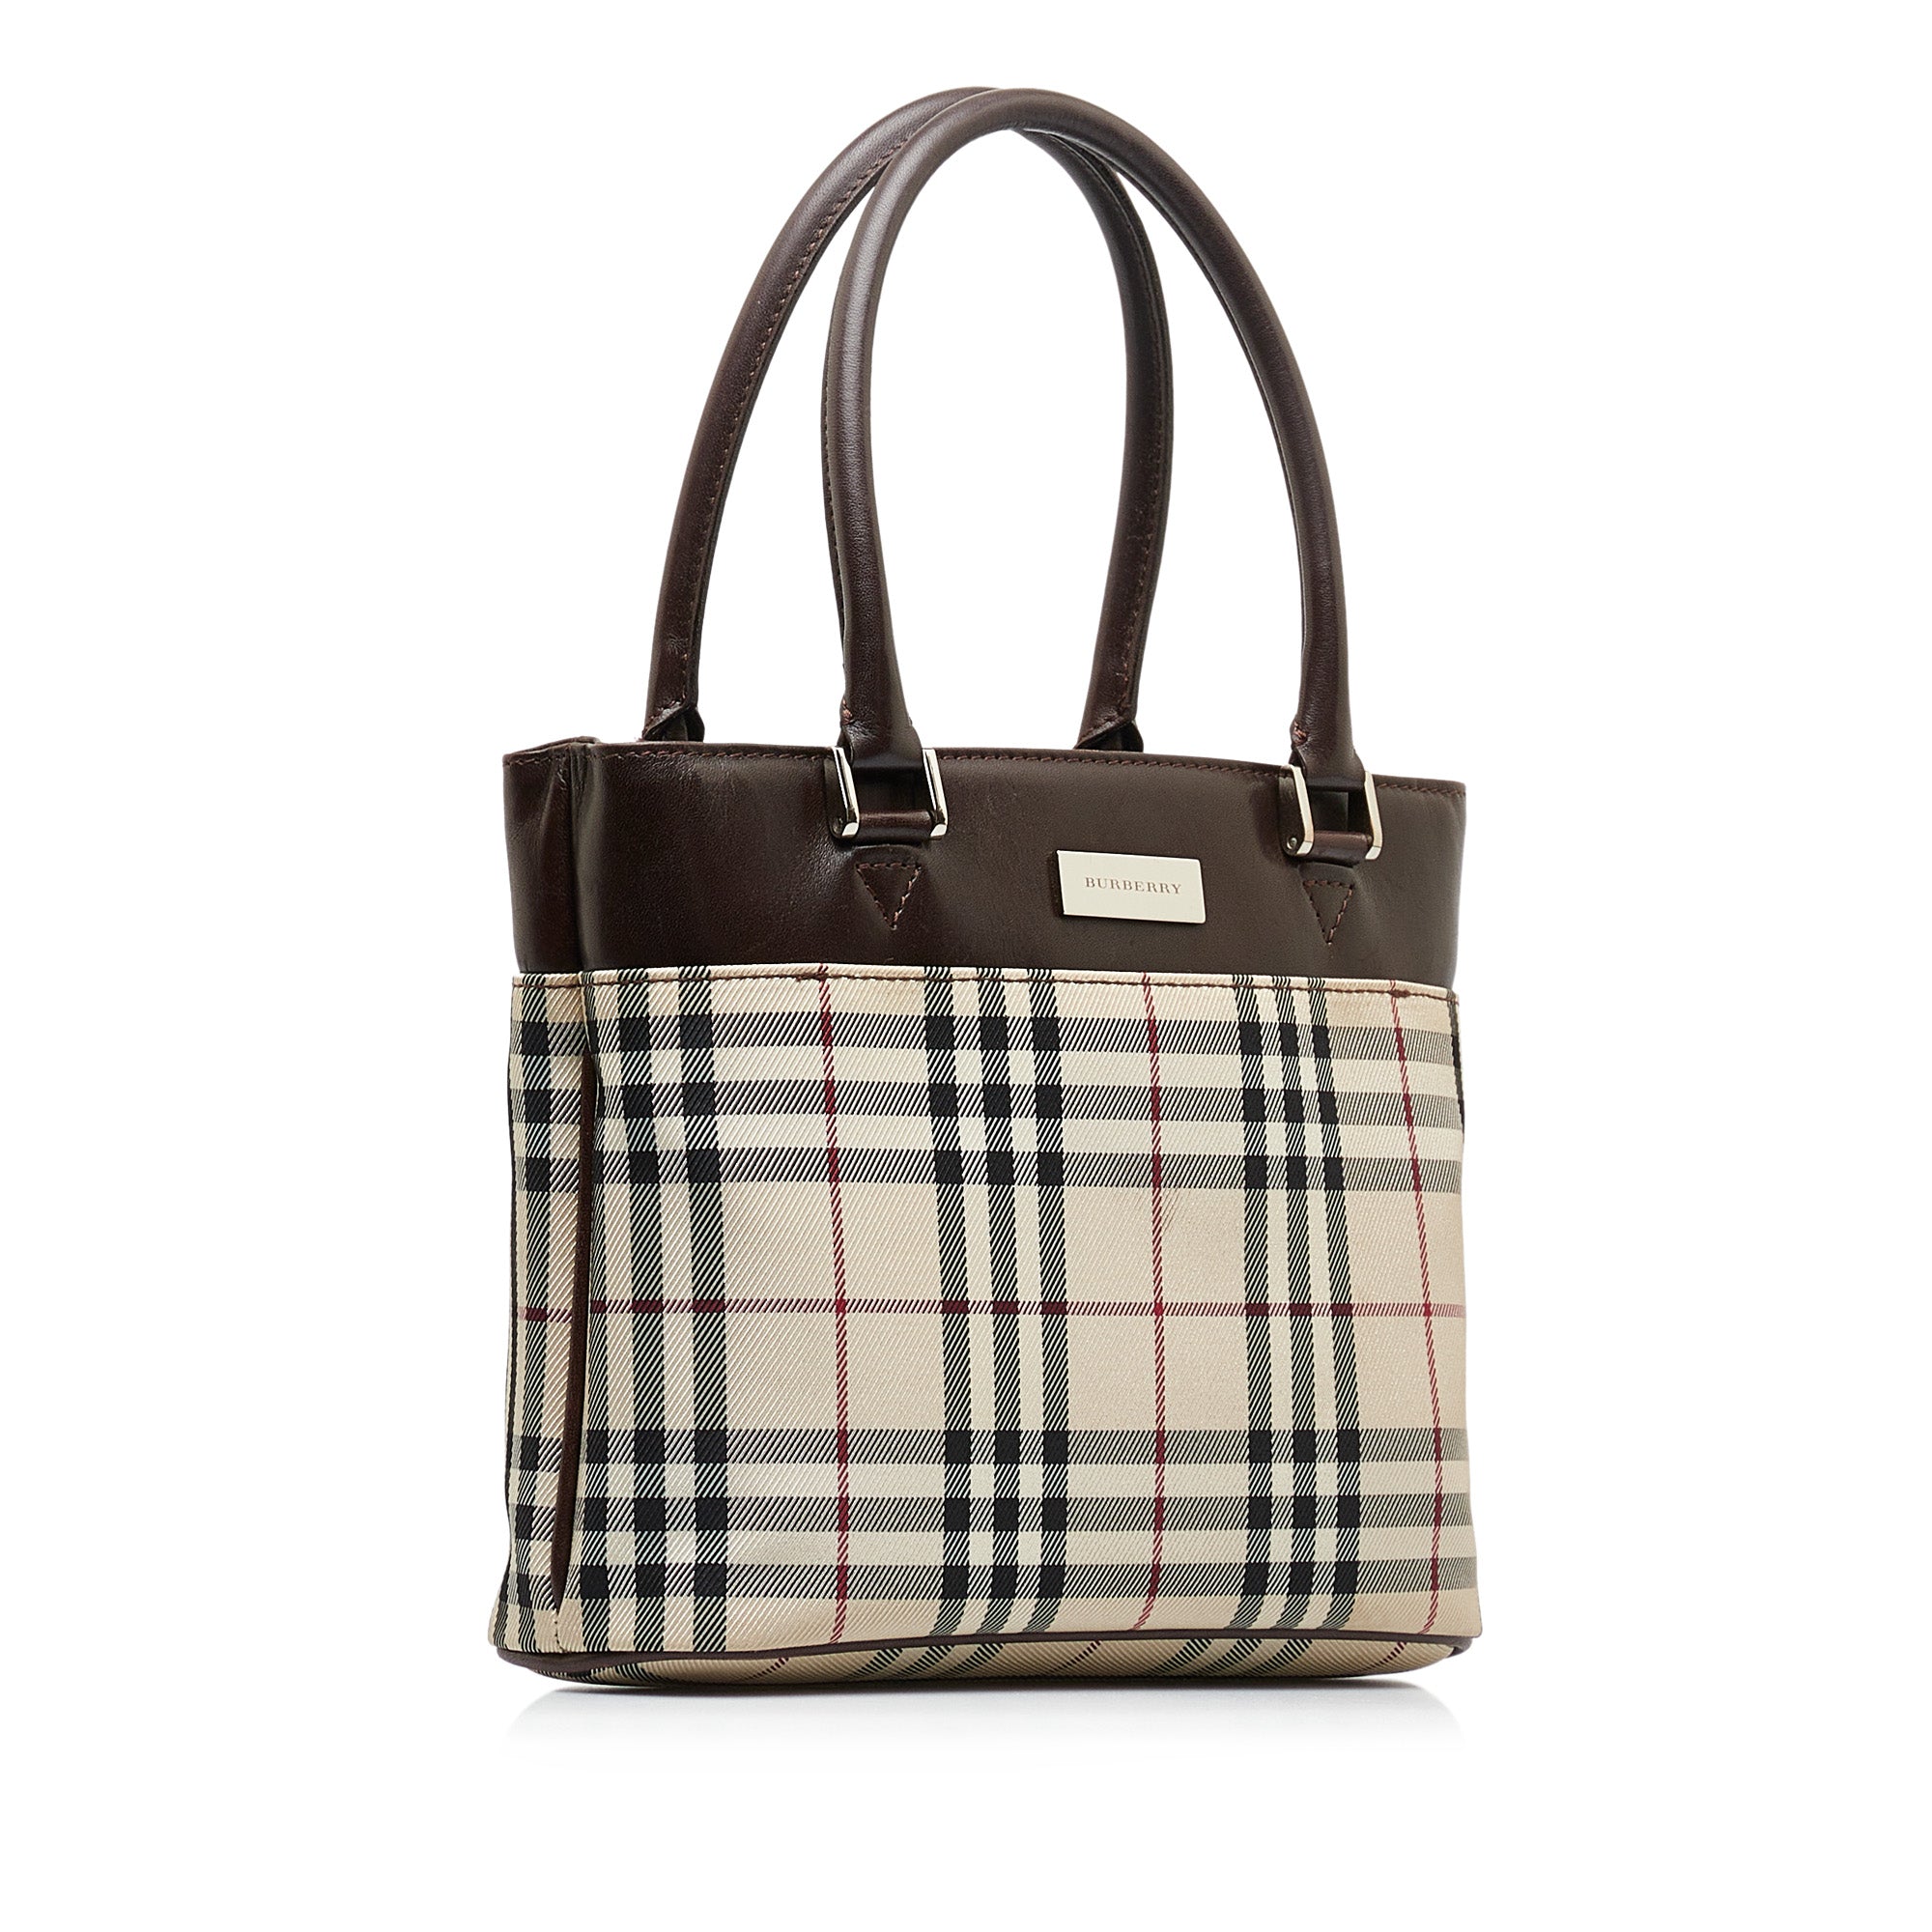 Burberry, Bags, Burberry Checked Tote Black And White